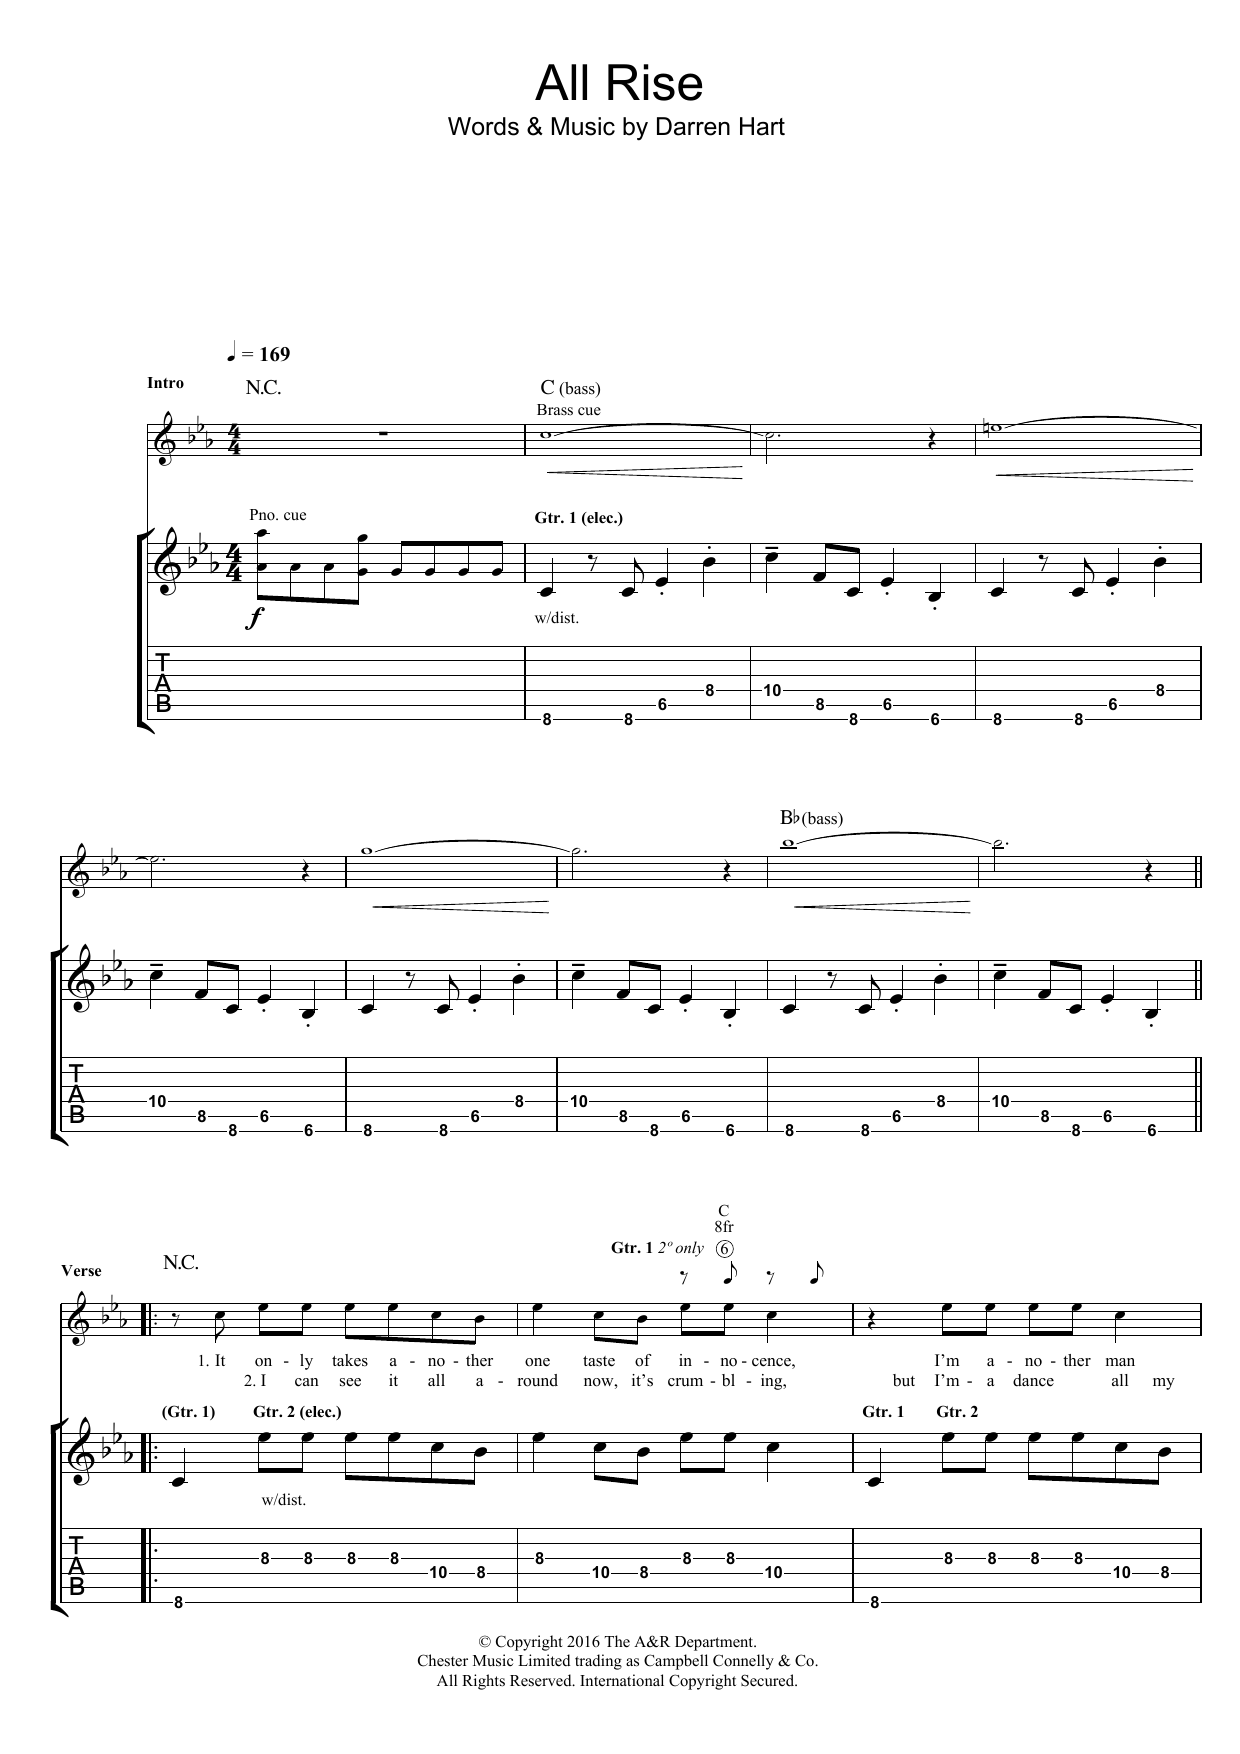 Download Harts All Rise (Play It Cool) Sheet Music